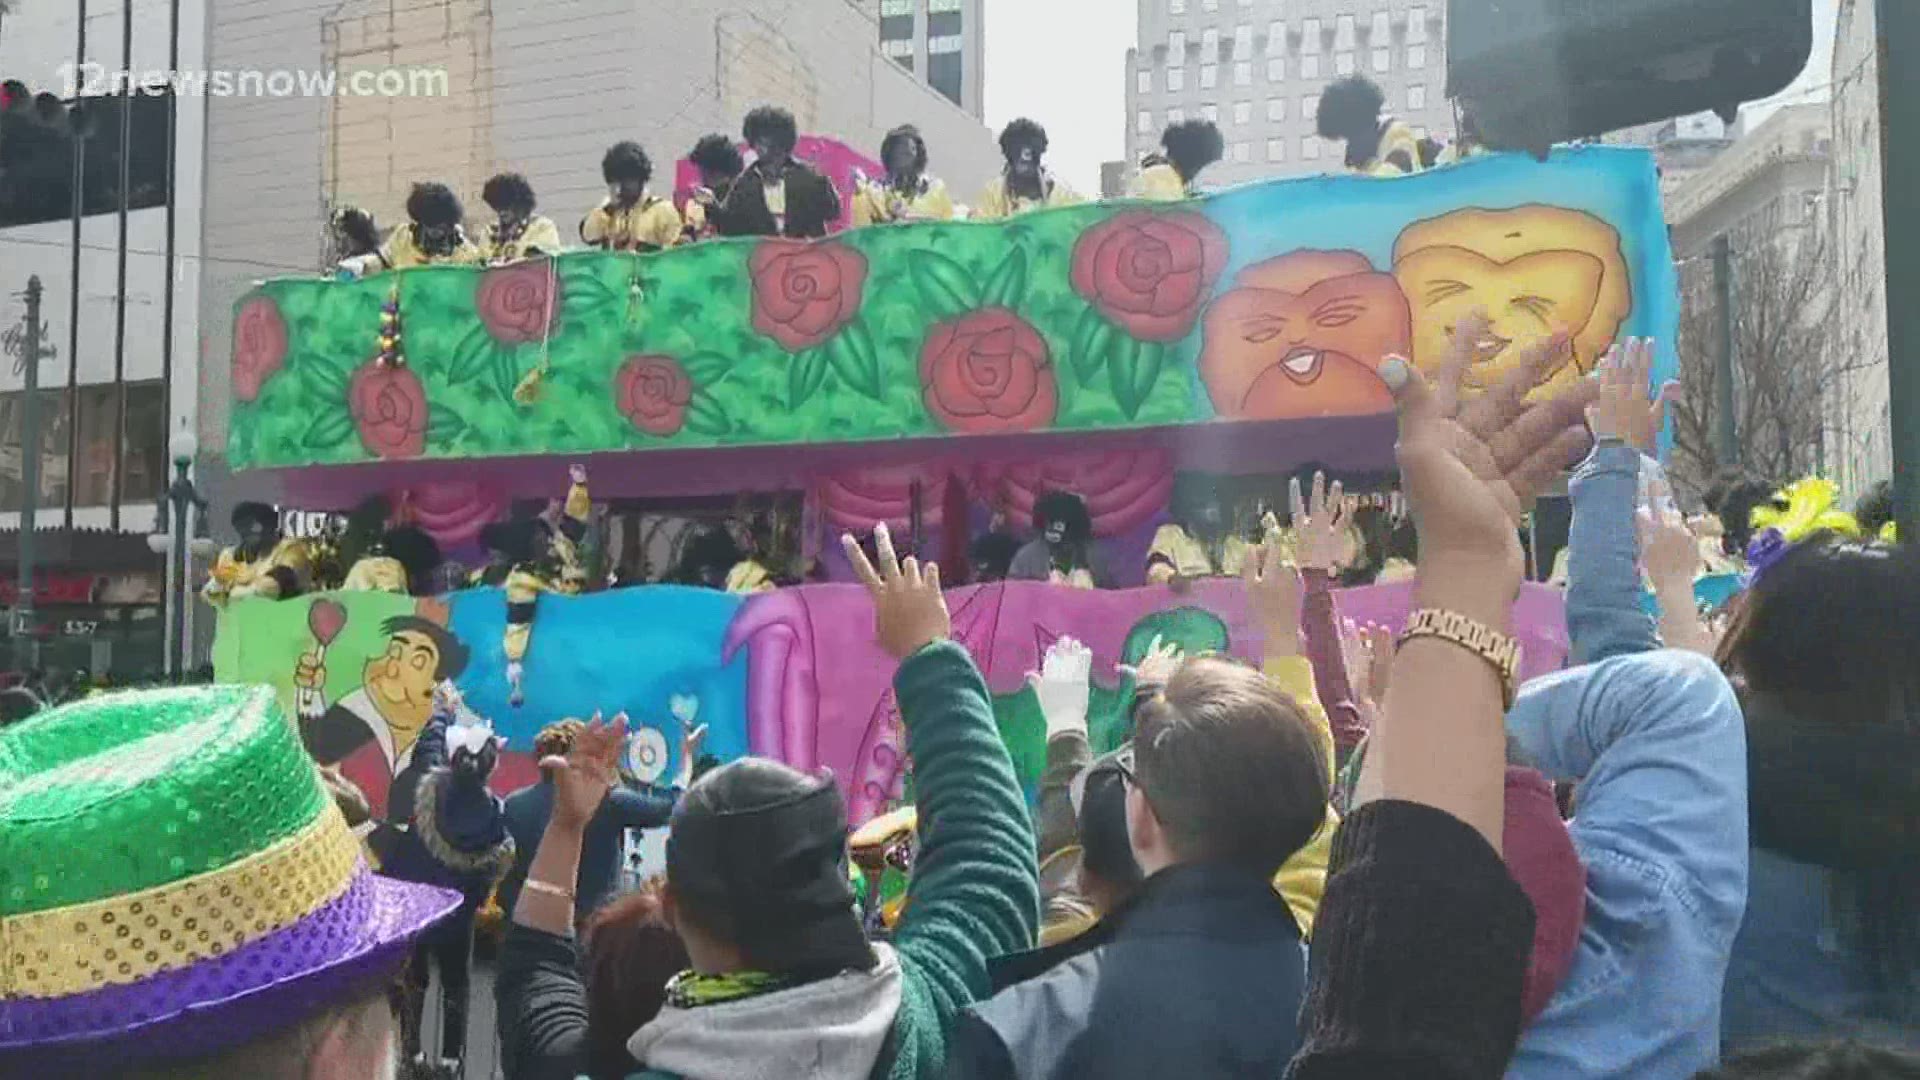 The city's officials said the holiday is not cancelled but certain celebrations will not be permitted, including the Mardi Gras parade.